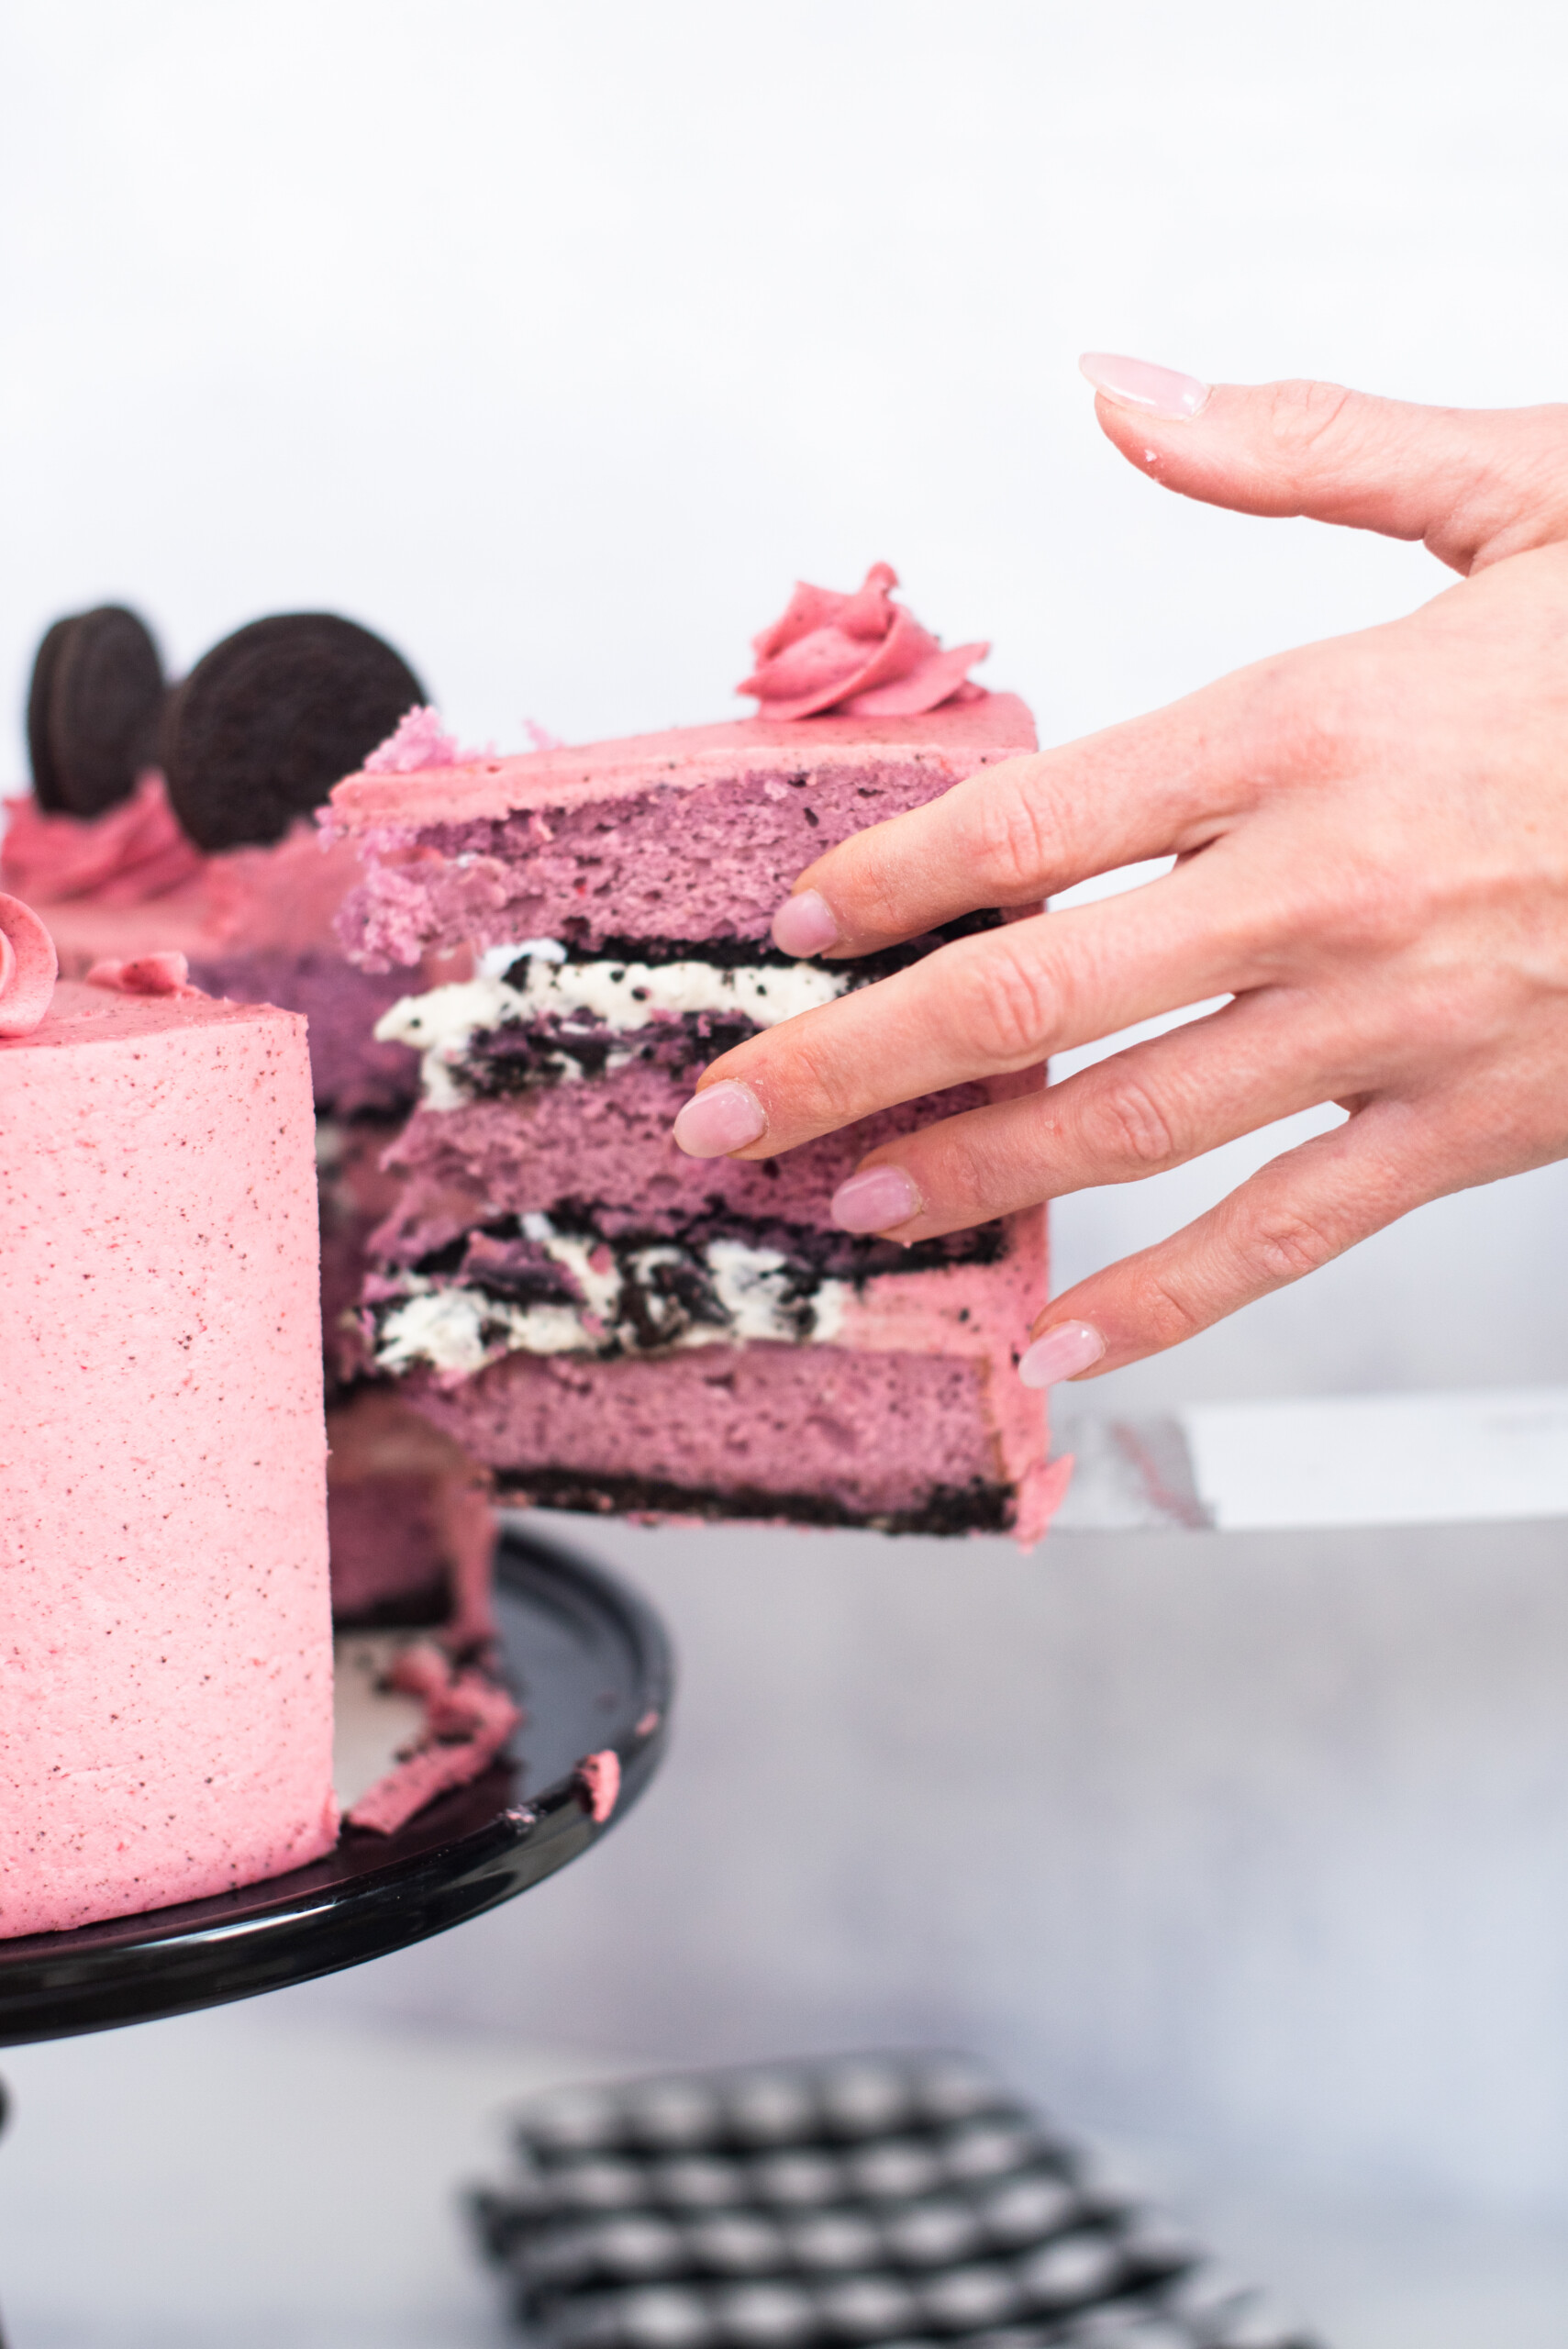 Woman cutting a slice of cake.